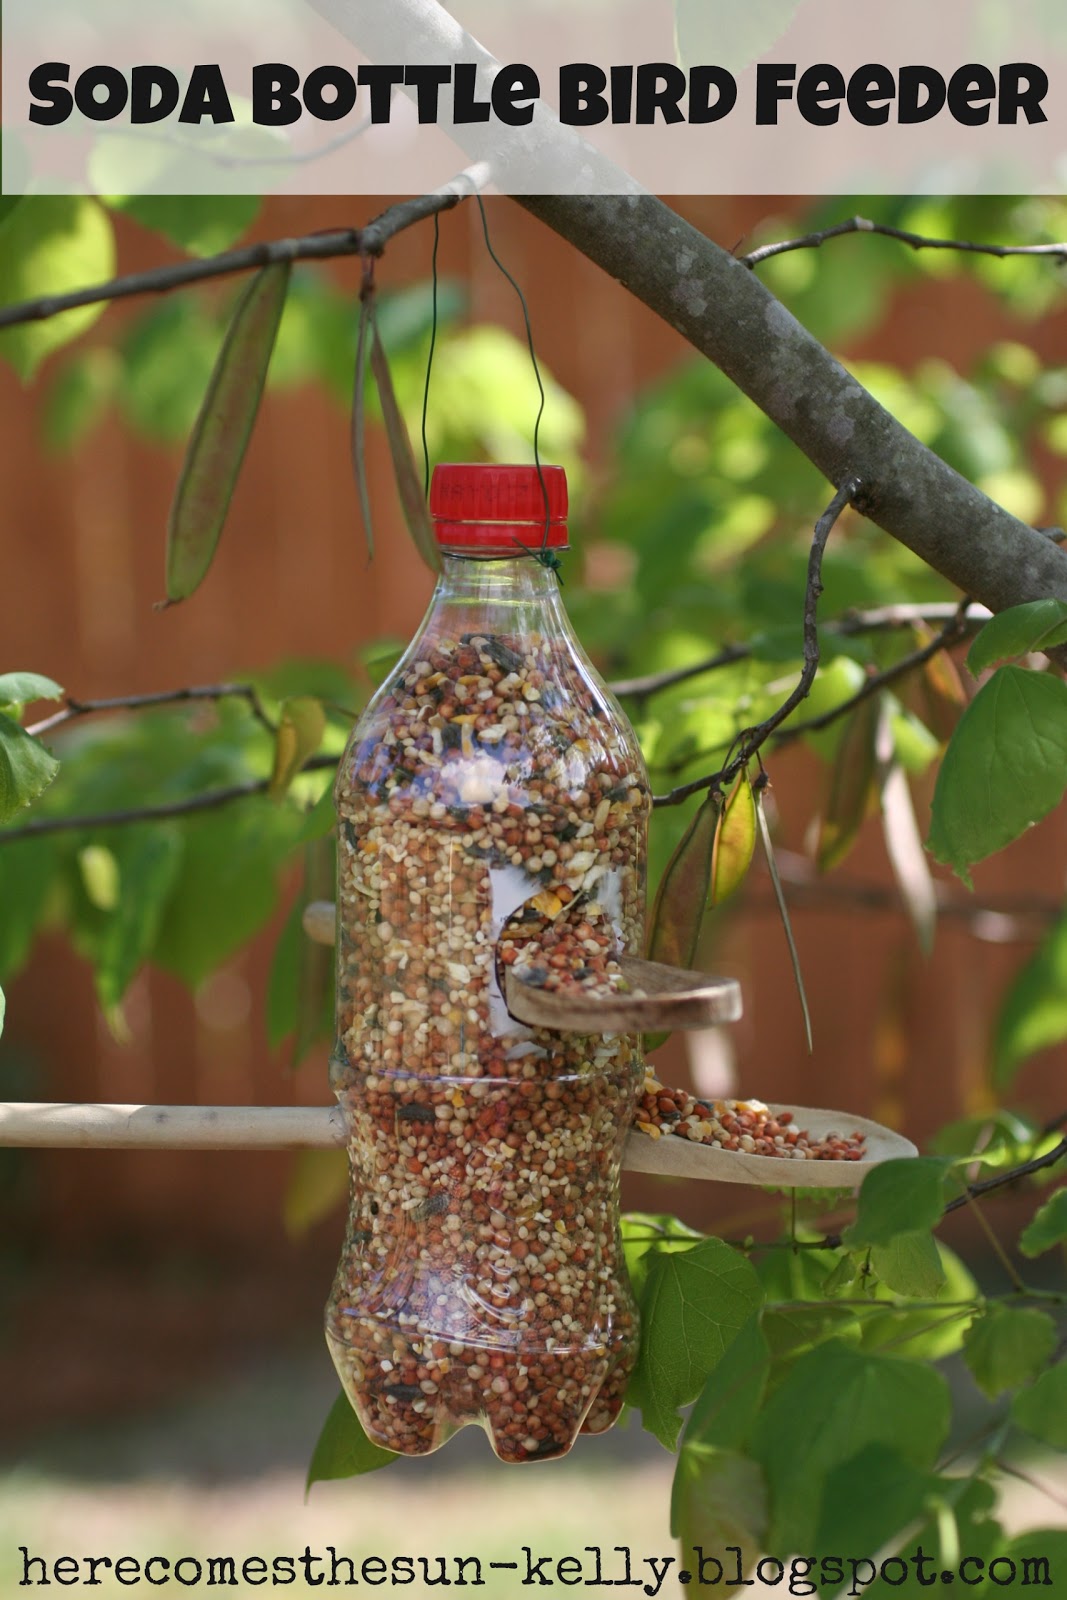 How to Make a Bird-feeder From Water-bottles! (tutorial/instructions)